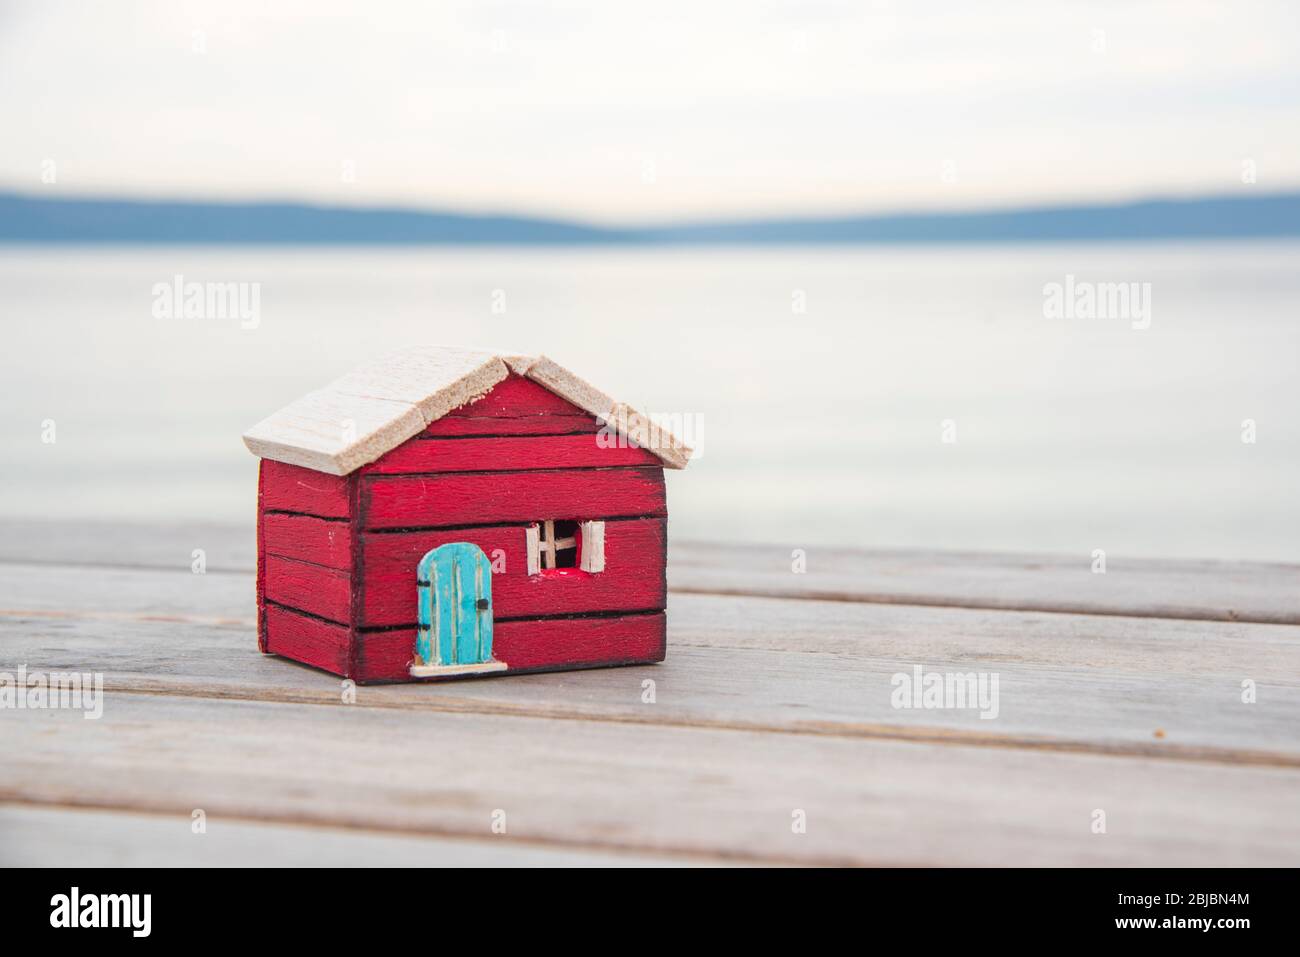 wooden model house on the beach. stay at home stay safe Stock Photo